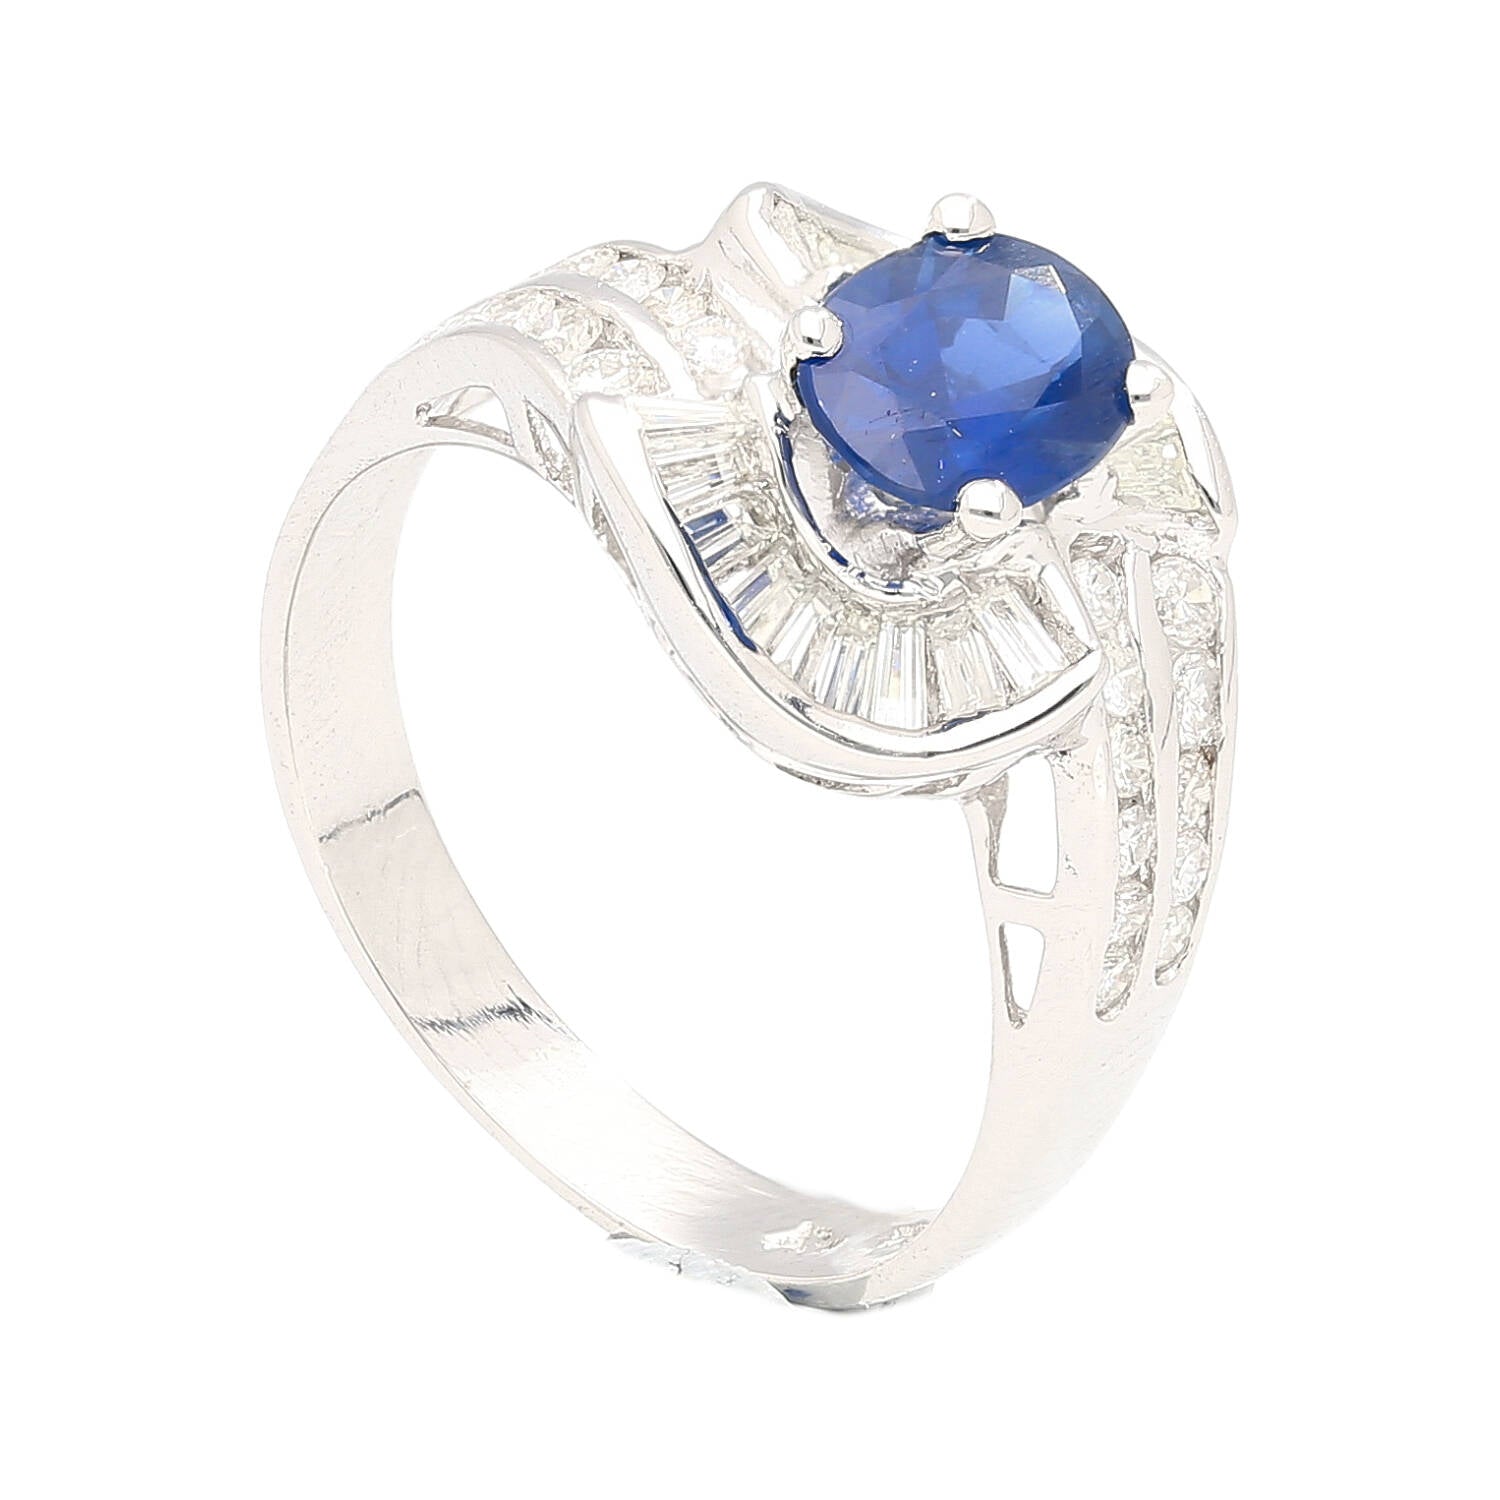 Natural 1.14 Carat Oval Cut Blue Sapphire with Round & Baguette Cut Diamonds in a Swirled 18K White Gold Ring Setting